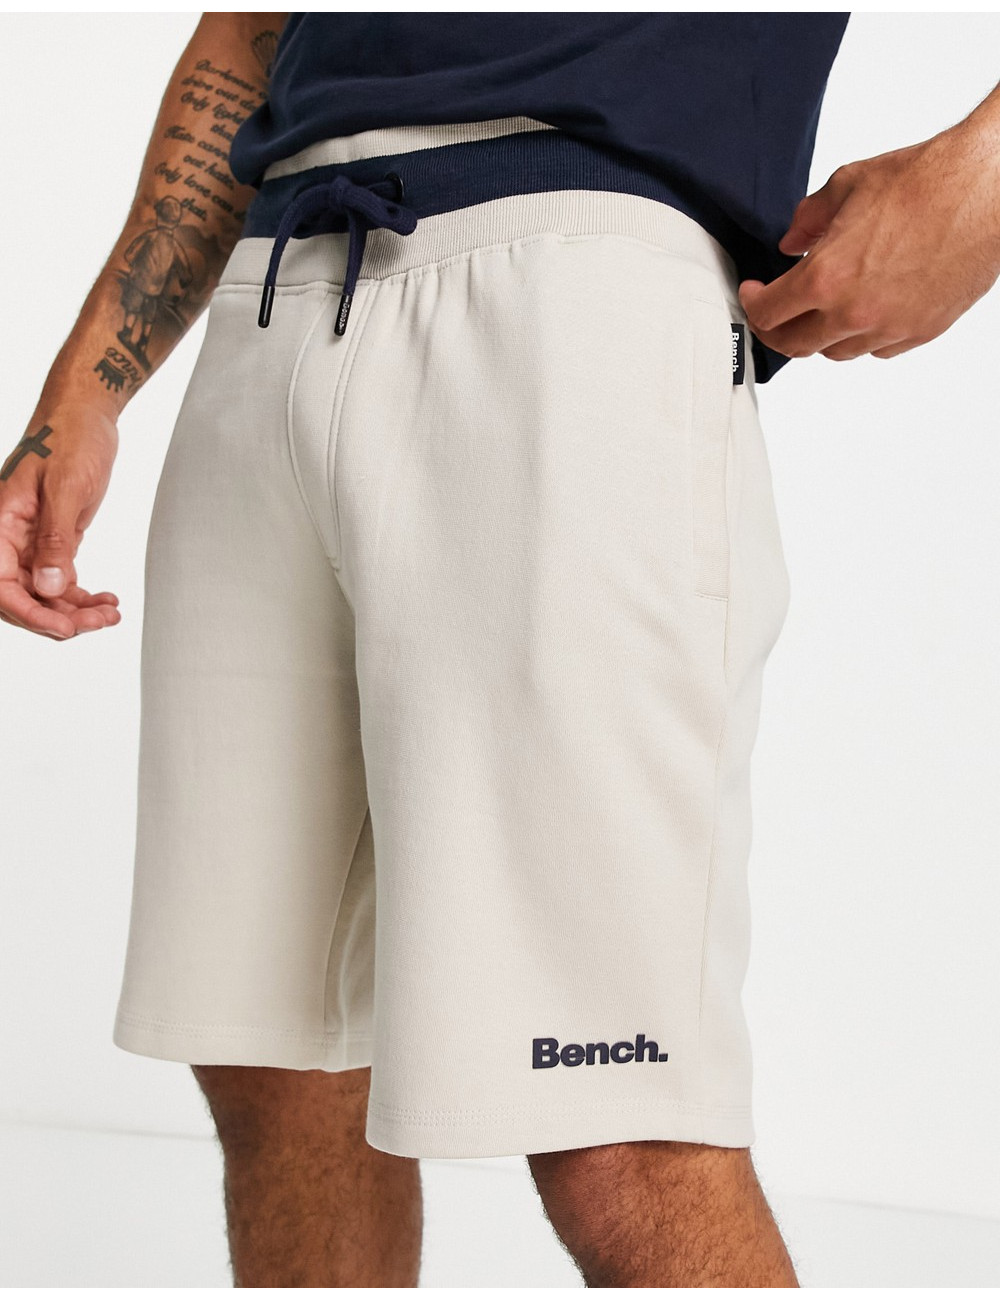 Bench jersey shorts in stone